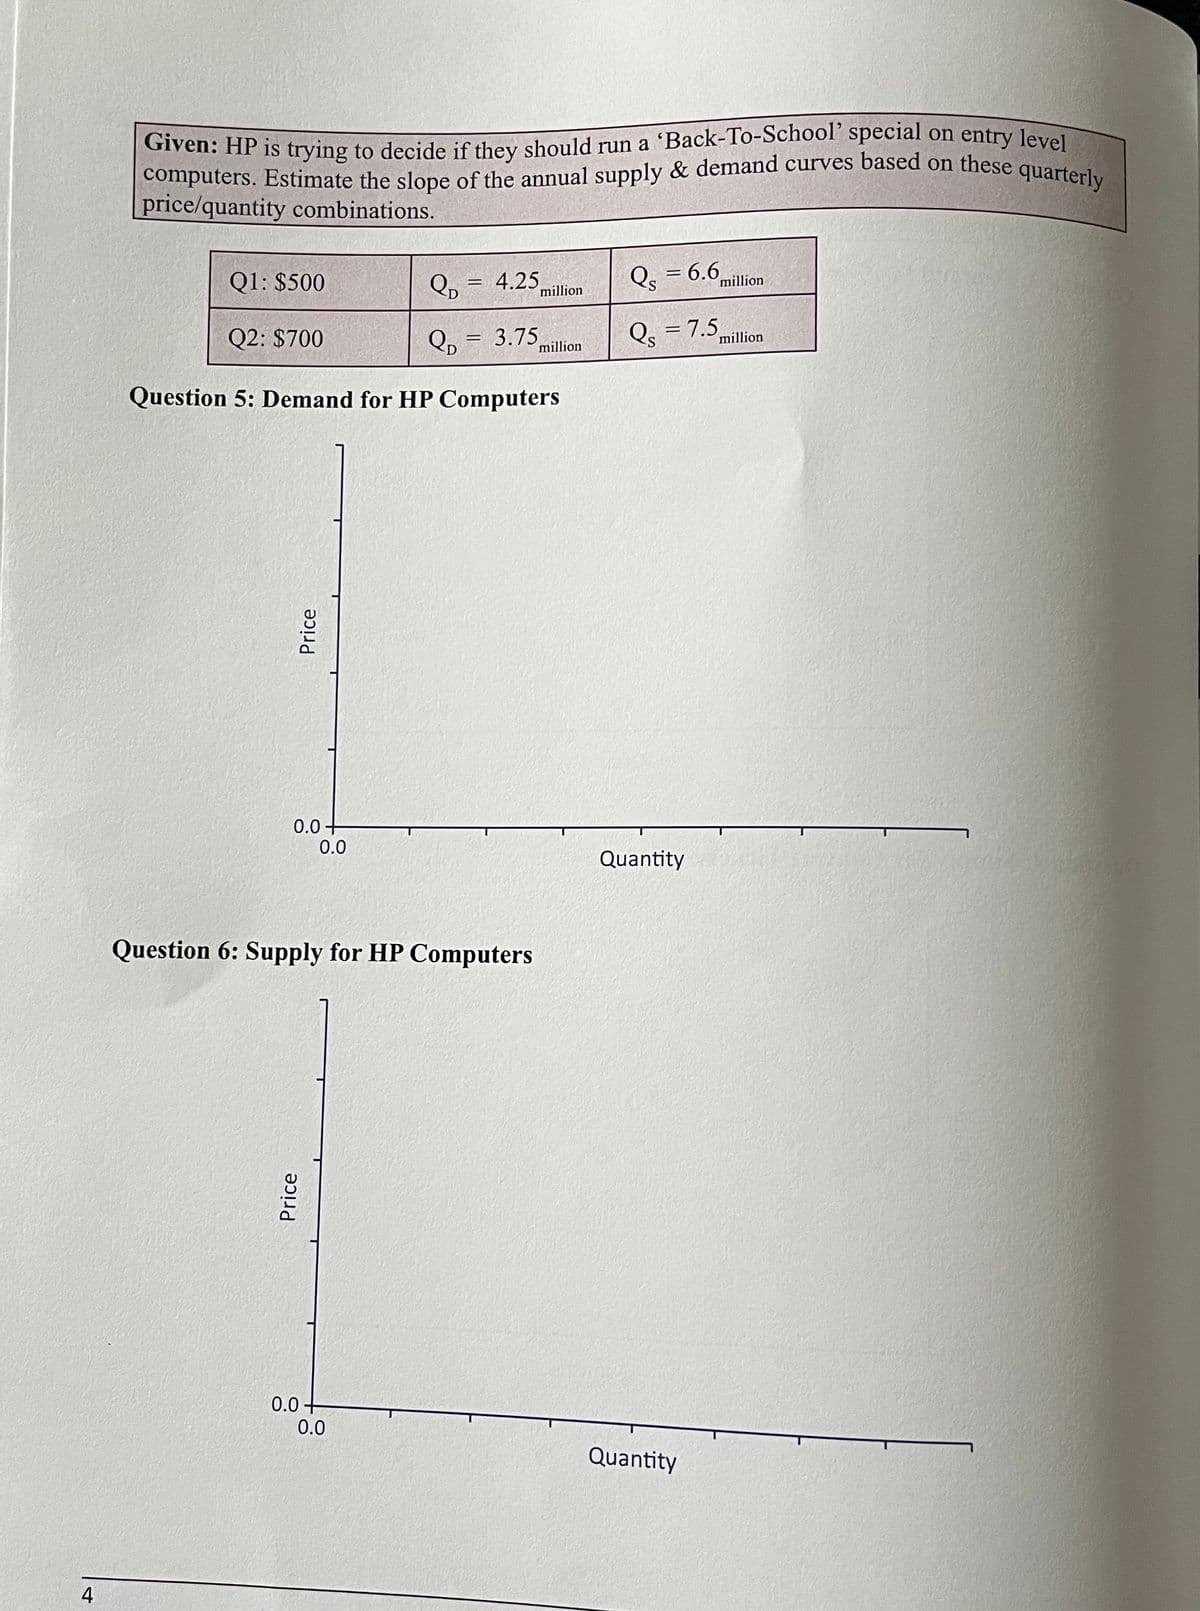 4
Given: HP is trying to decide if they should run a 'Back-To-School' special on entry level
computers. Estimate the slope of the annual supply & demand curves based on these quarterly
price/quantity combinations.
Q1: $500
Q2: $700
Price
0.0
Price
Qp = 3.75
Question 5: Demand for HP Computers
0.0
0.0+
QD
=
Question 6: Supply for HP Computers
0.0
4.25
million
Q = 6.6
Qs =7.5
million
Quantity
million
Quantity
million